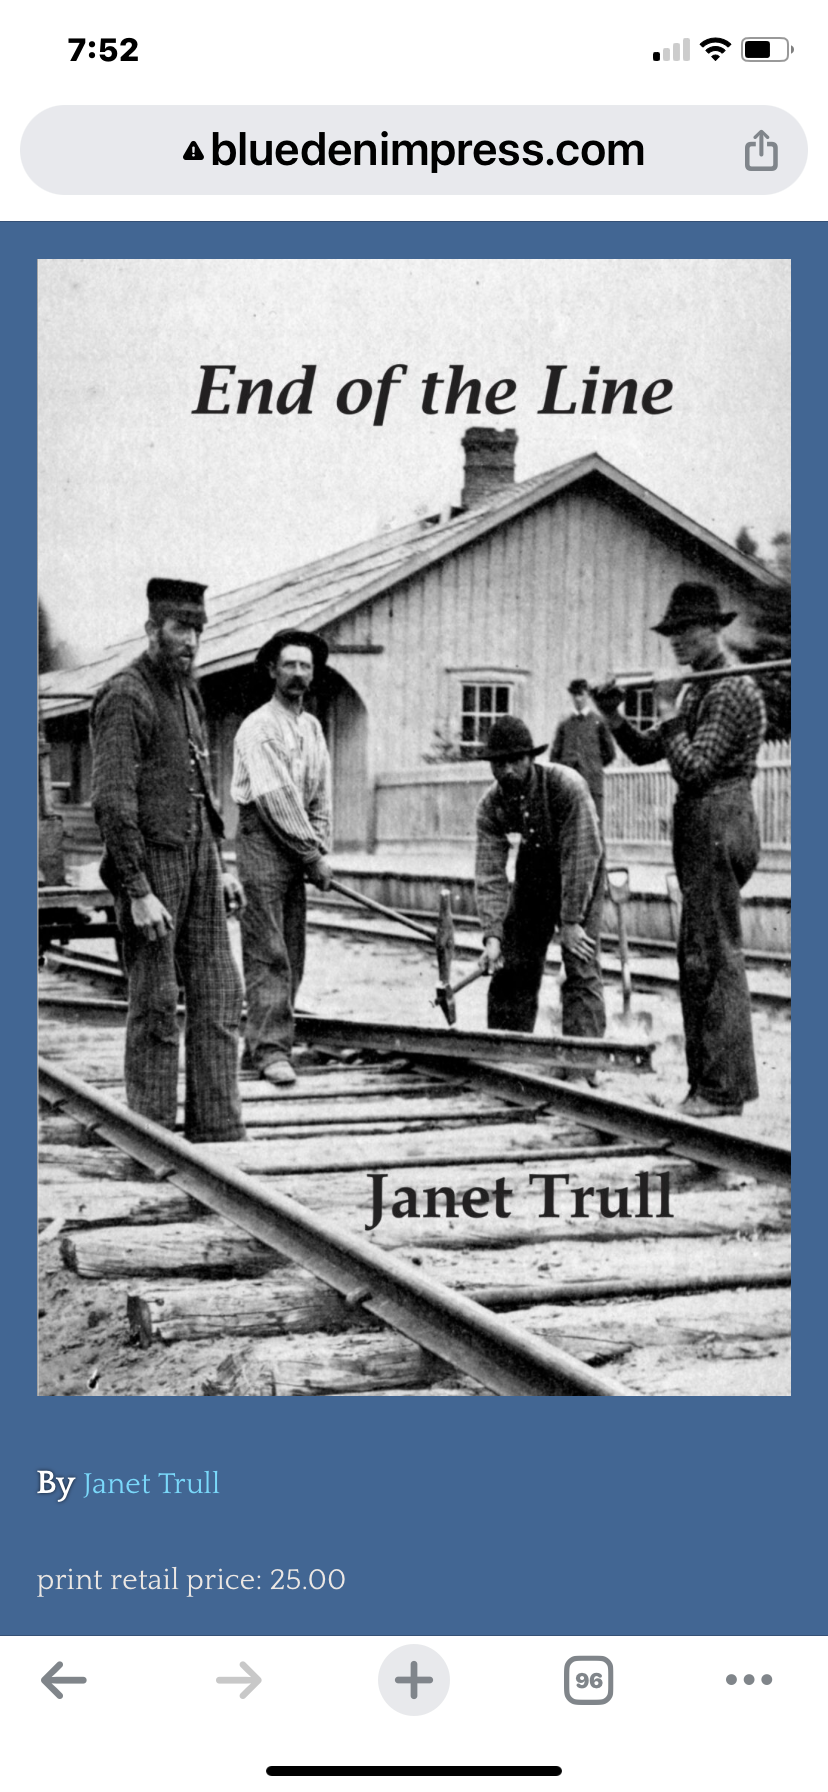 1878. The railway arrives in Haliburton, Ontario and changes everything. The dead have much to teach the living at the end of the line. 